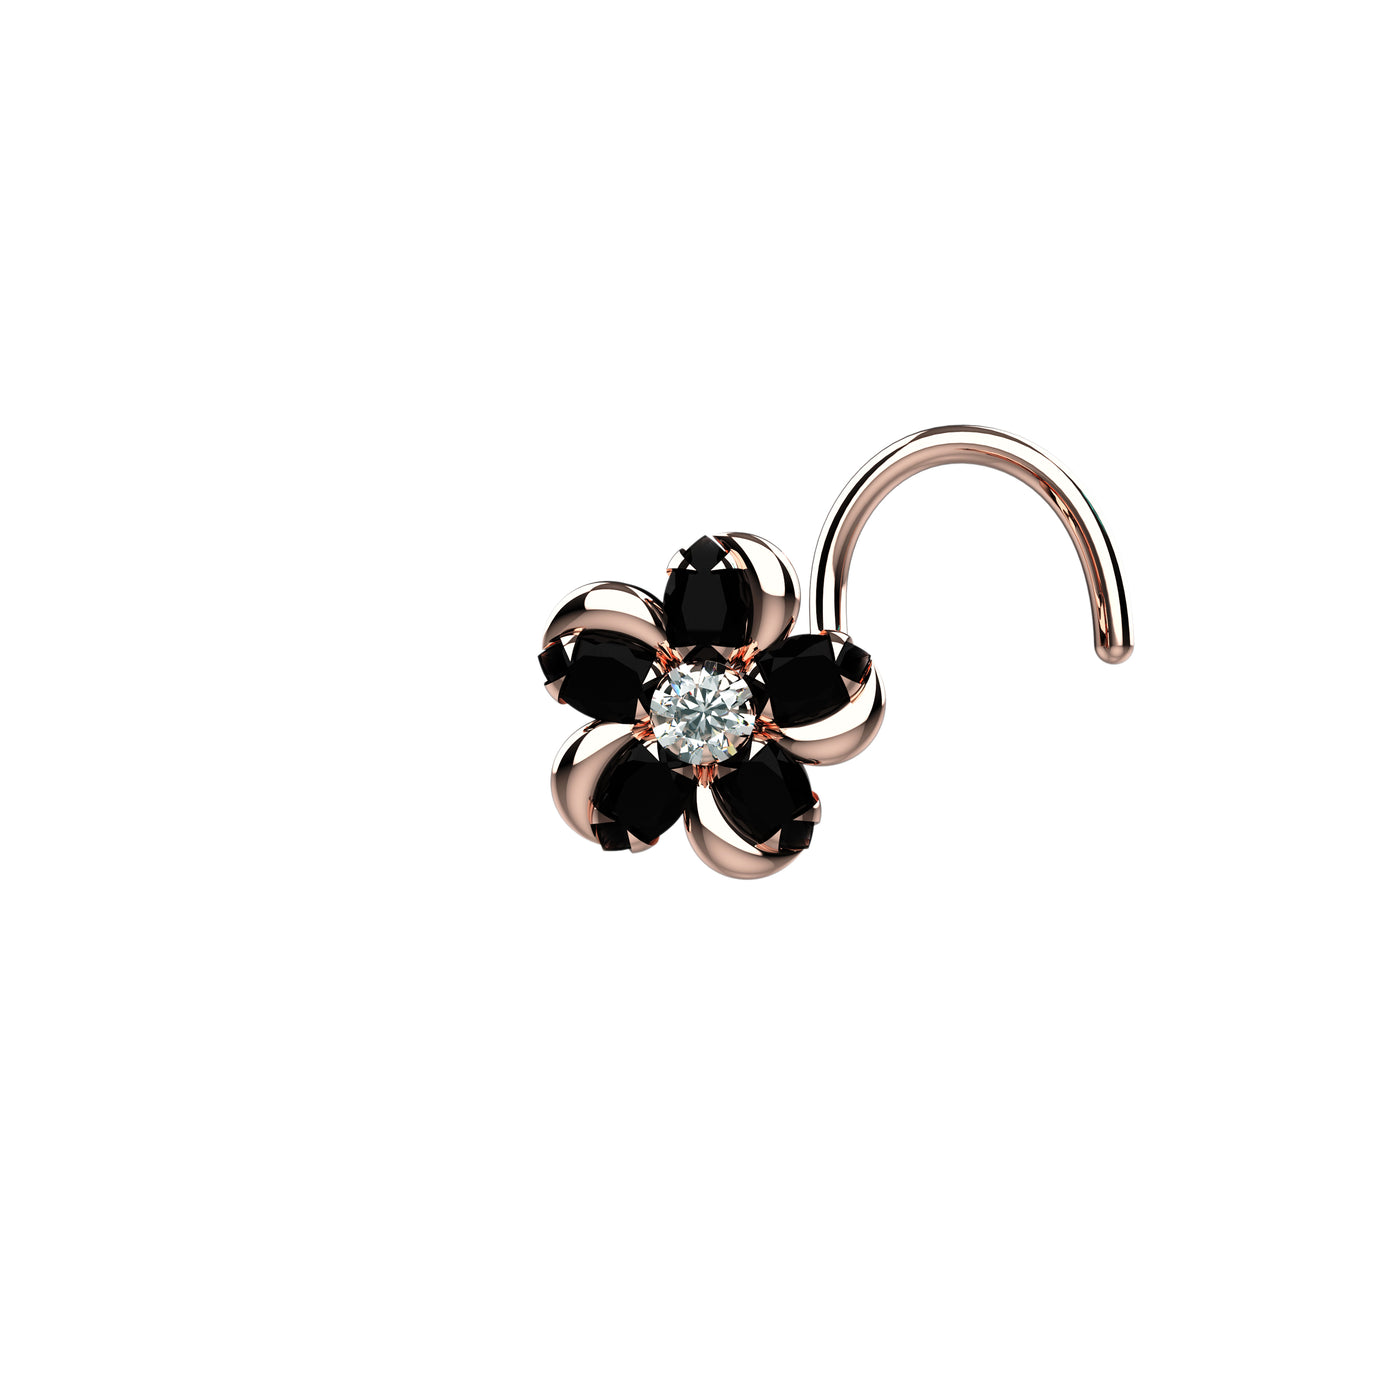 Unique Nose Rings At Lowest Prices